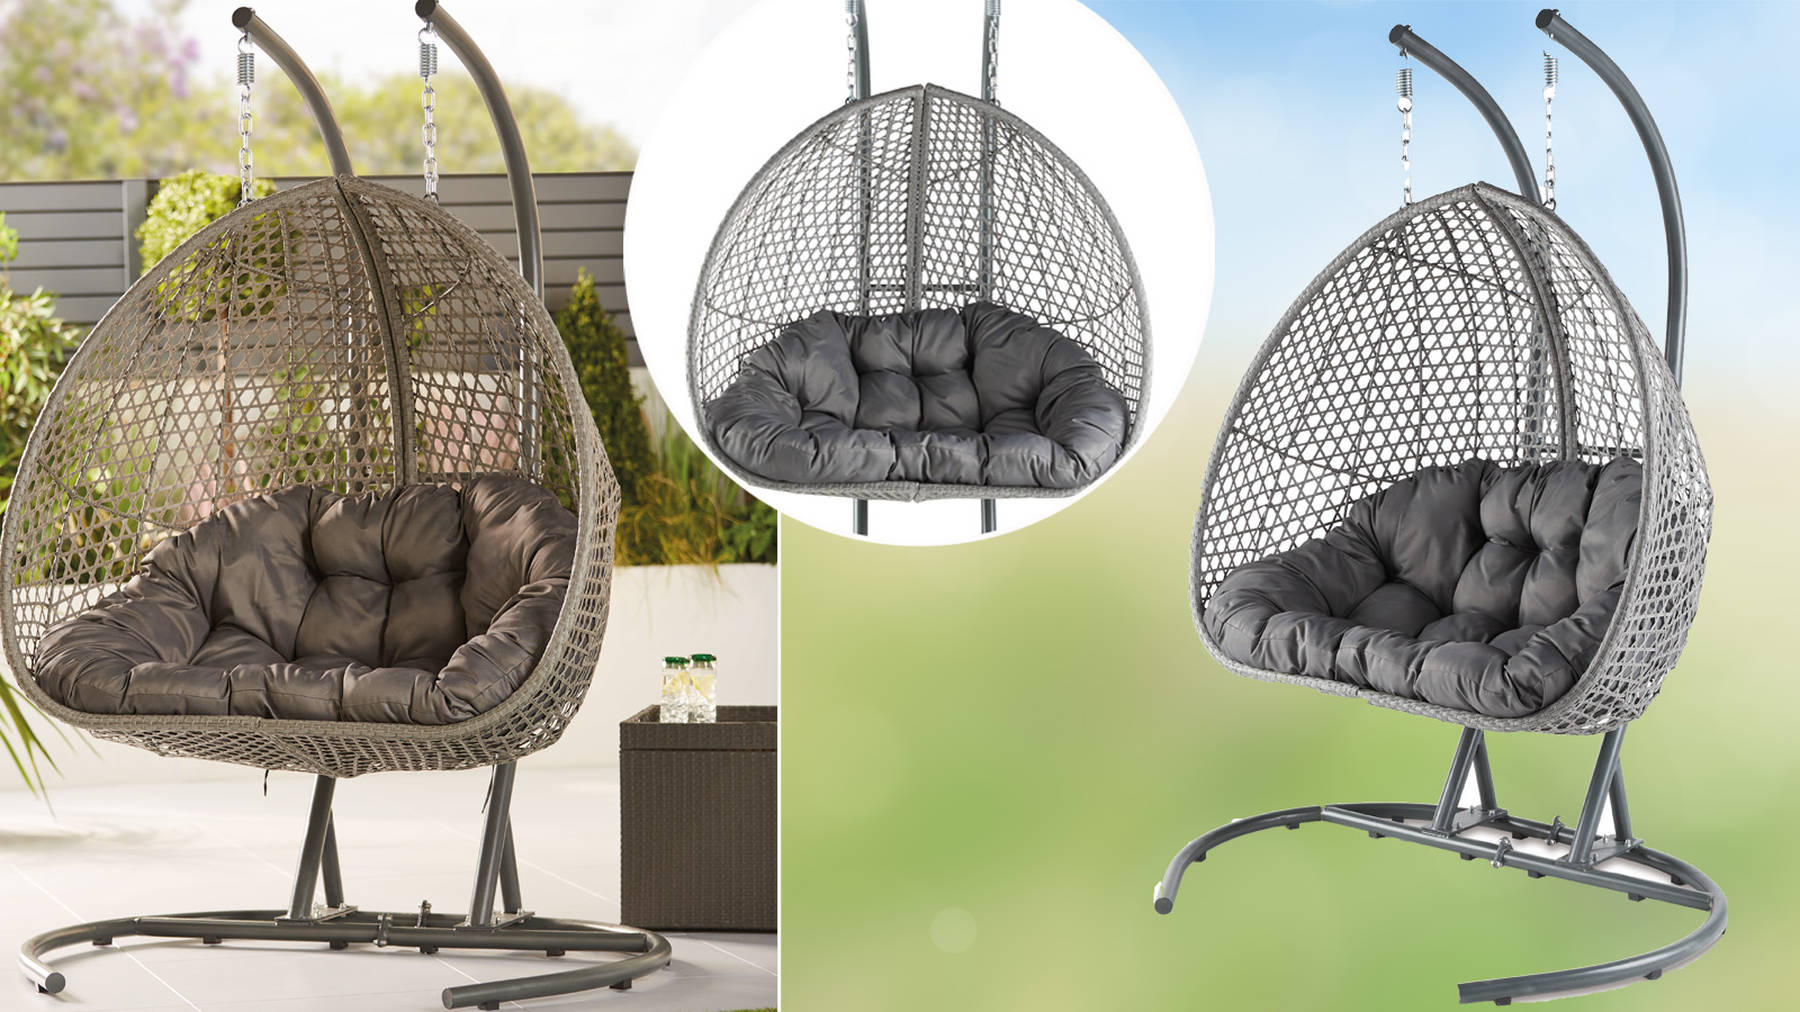 You Can Get A Hanging Egg Chair Big Enough For Two People This Summer Heart